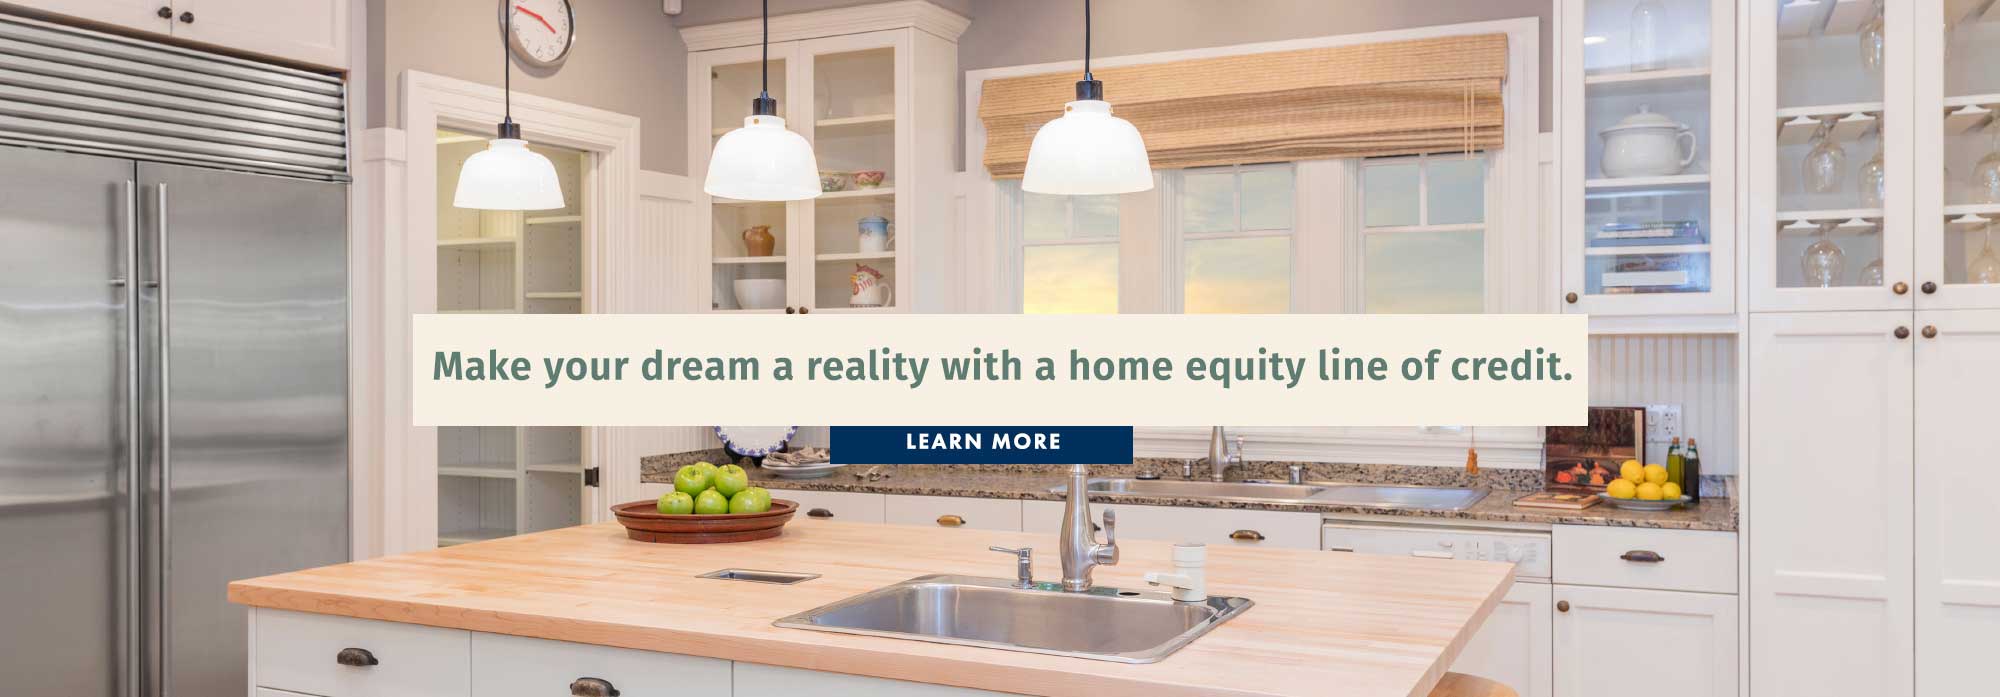 Make your dream a reality with a home equity line of credit. Learn more